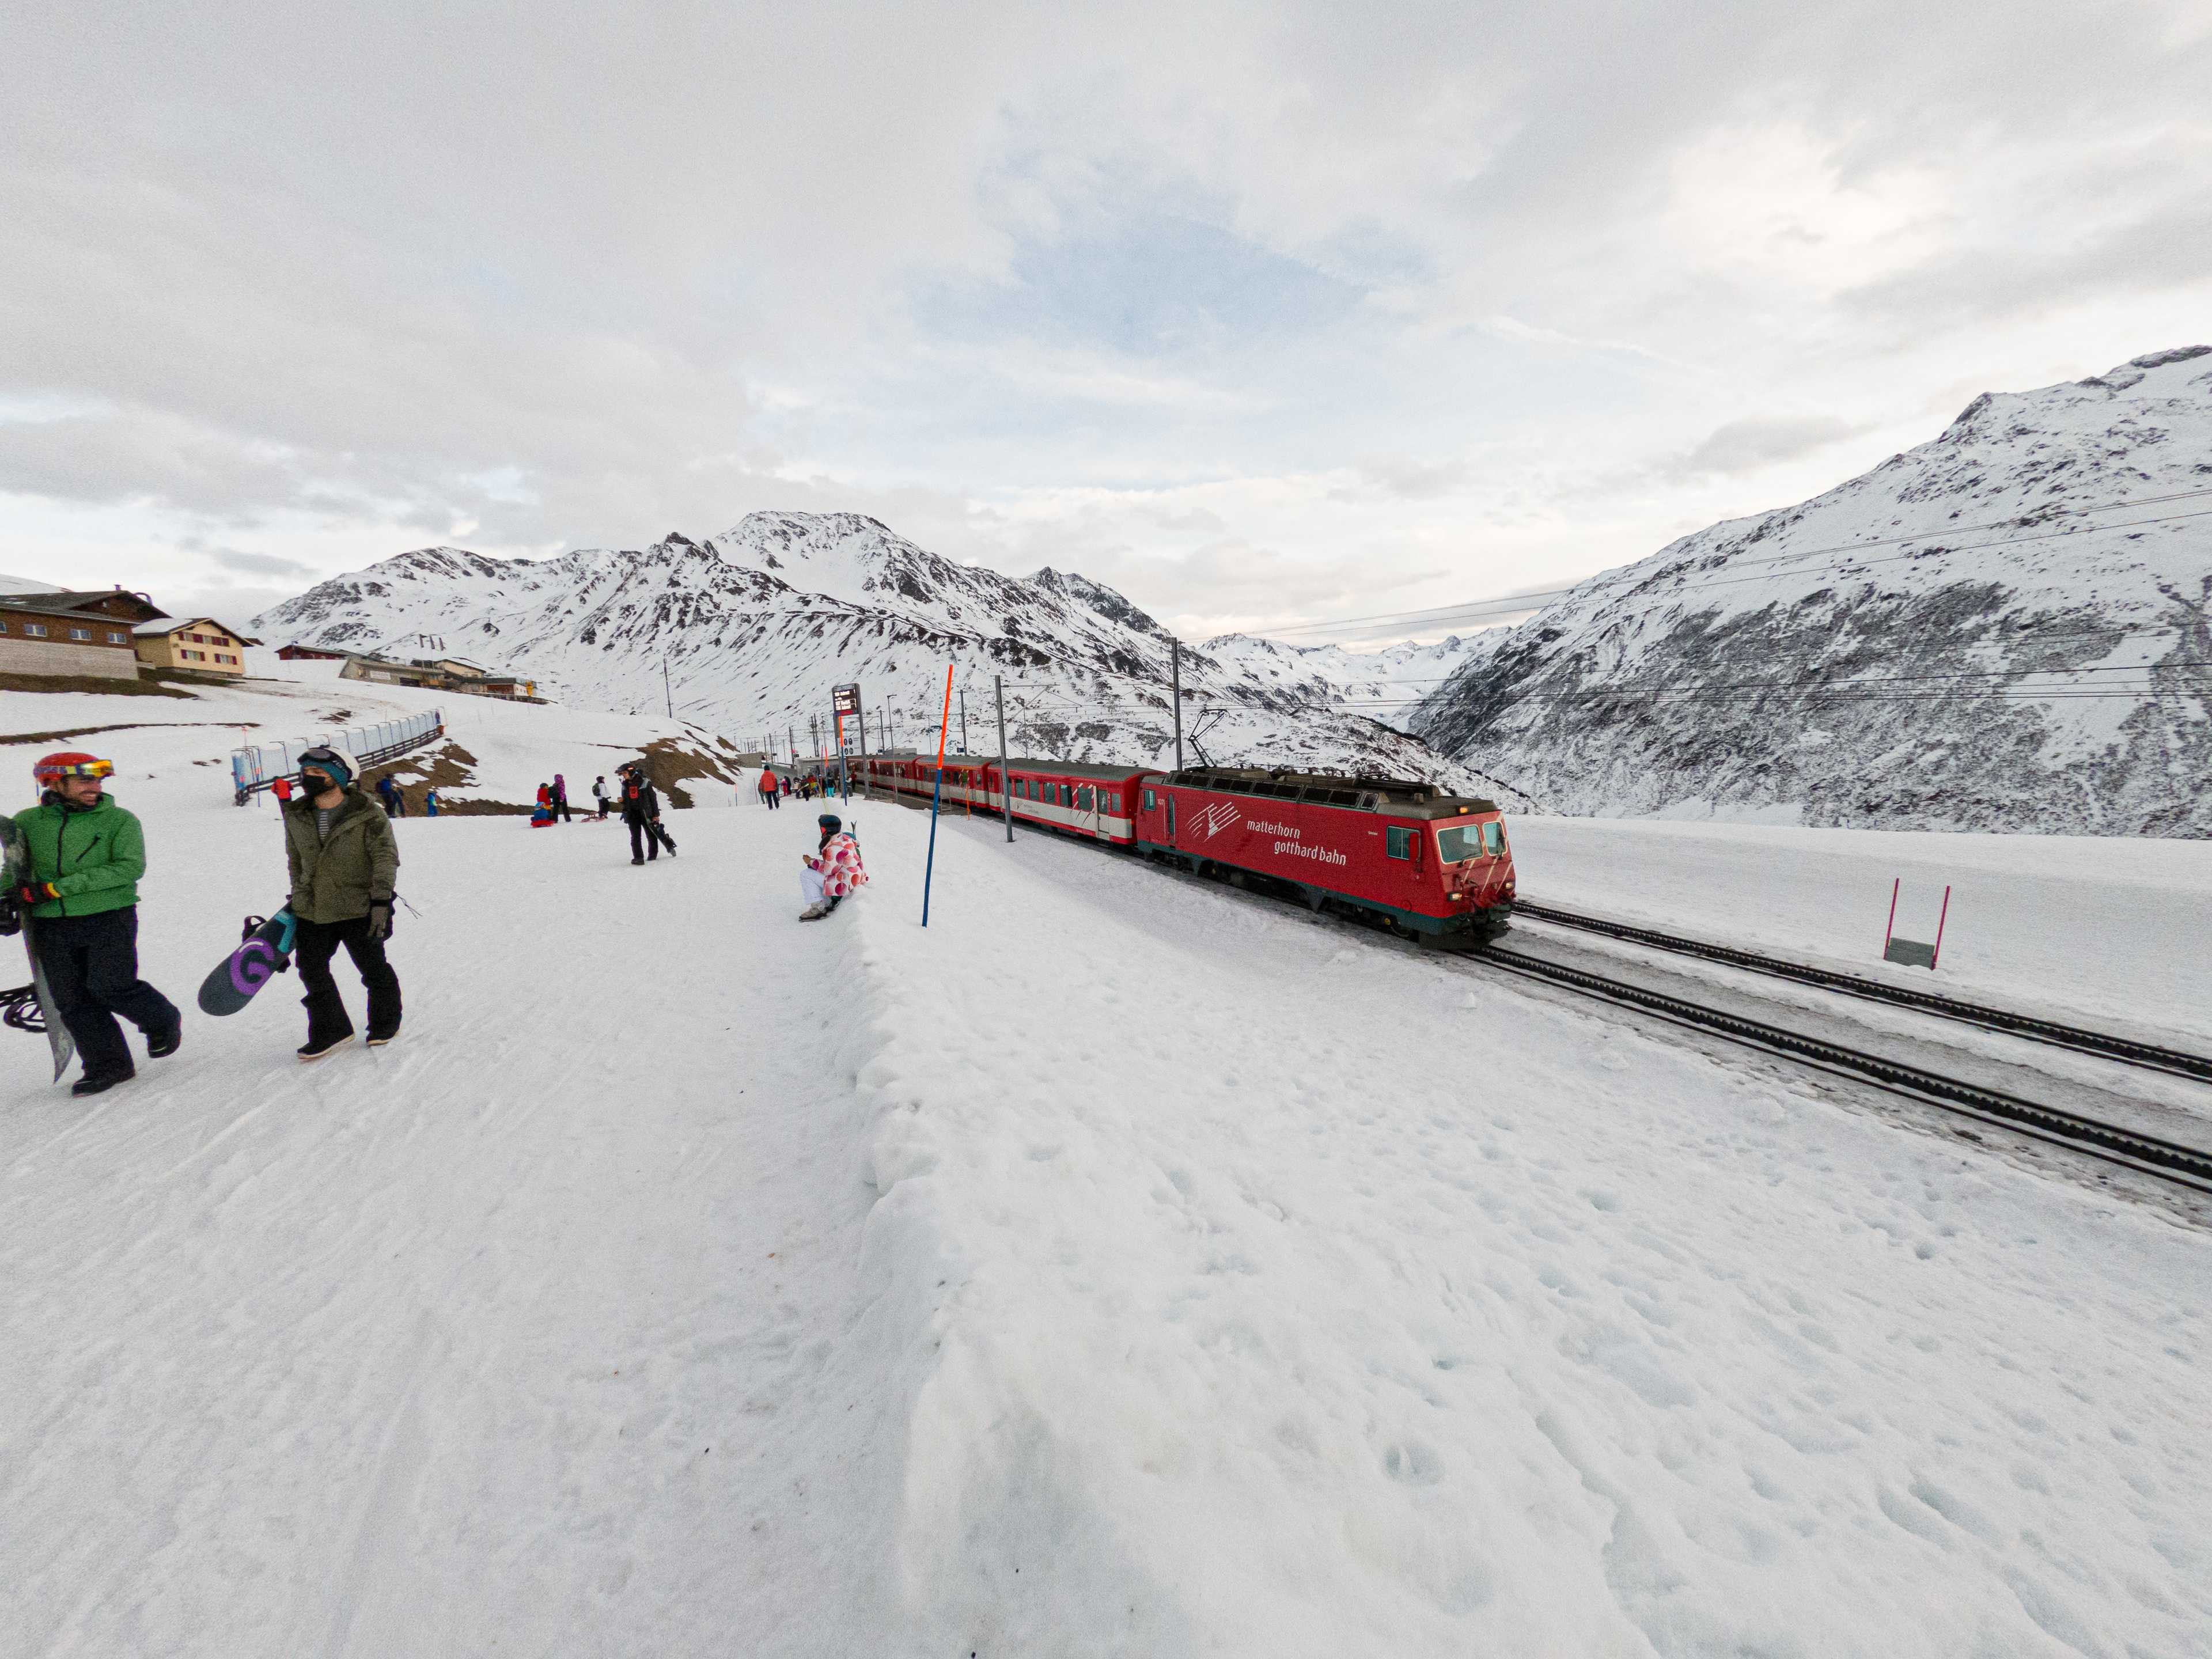 Trains can be used to commute between Andermatt, Sedrun and Disentis